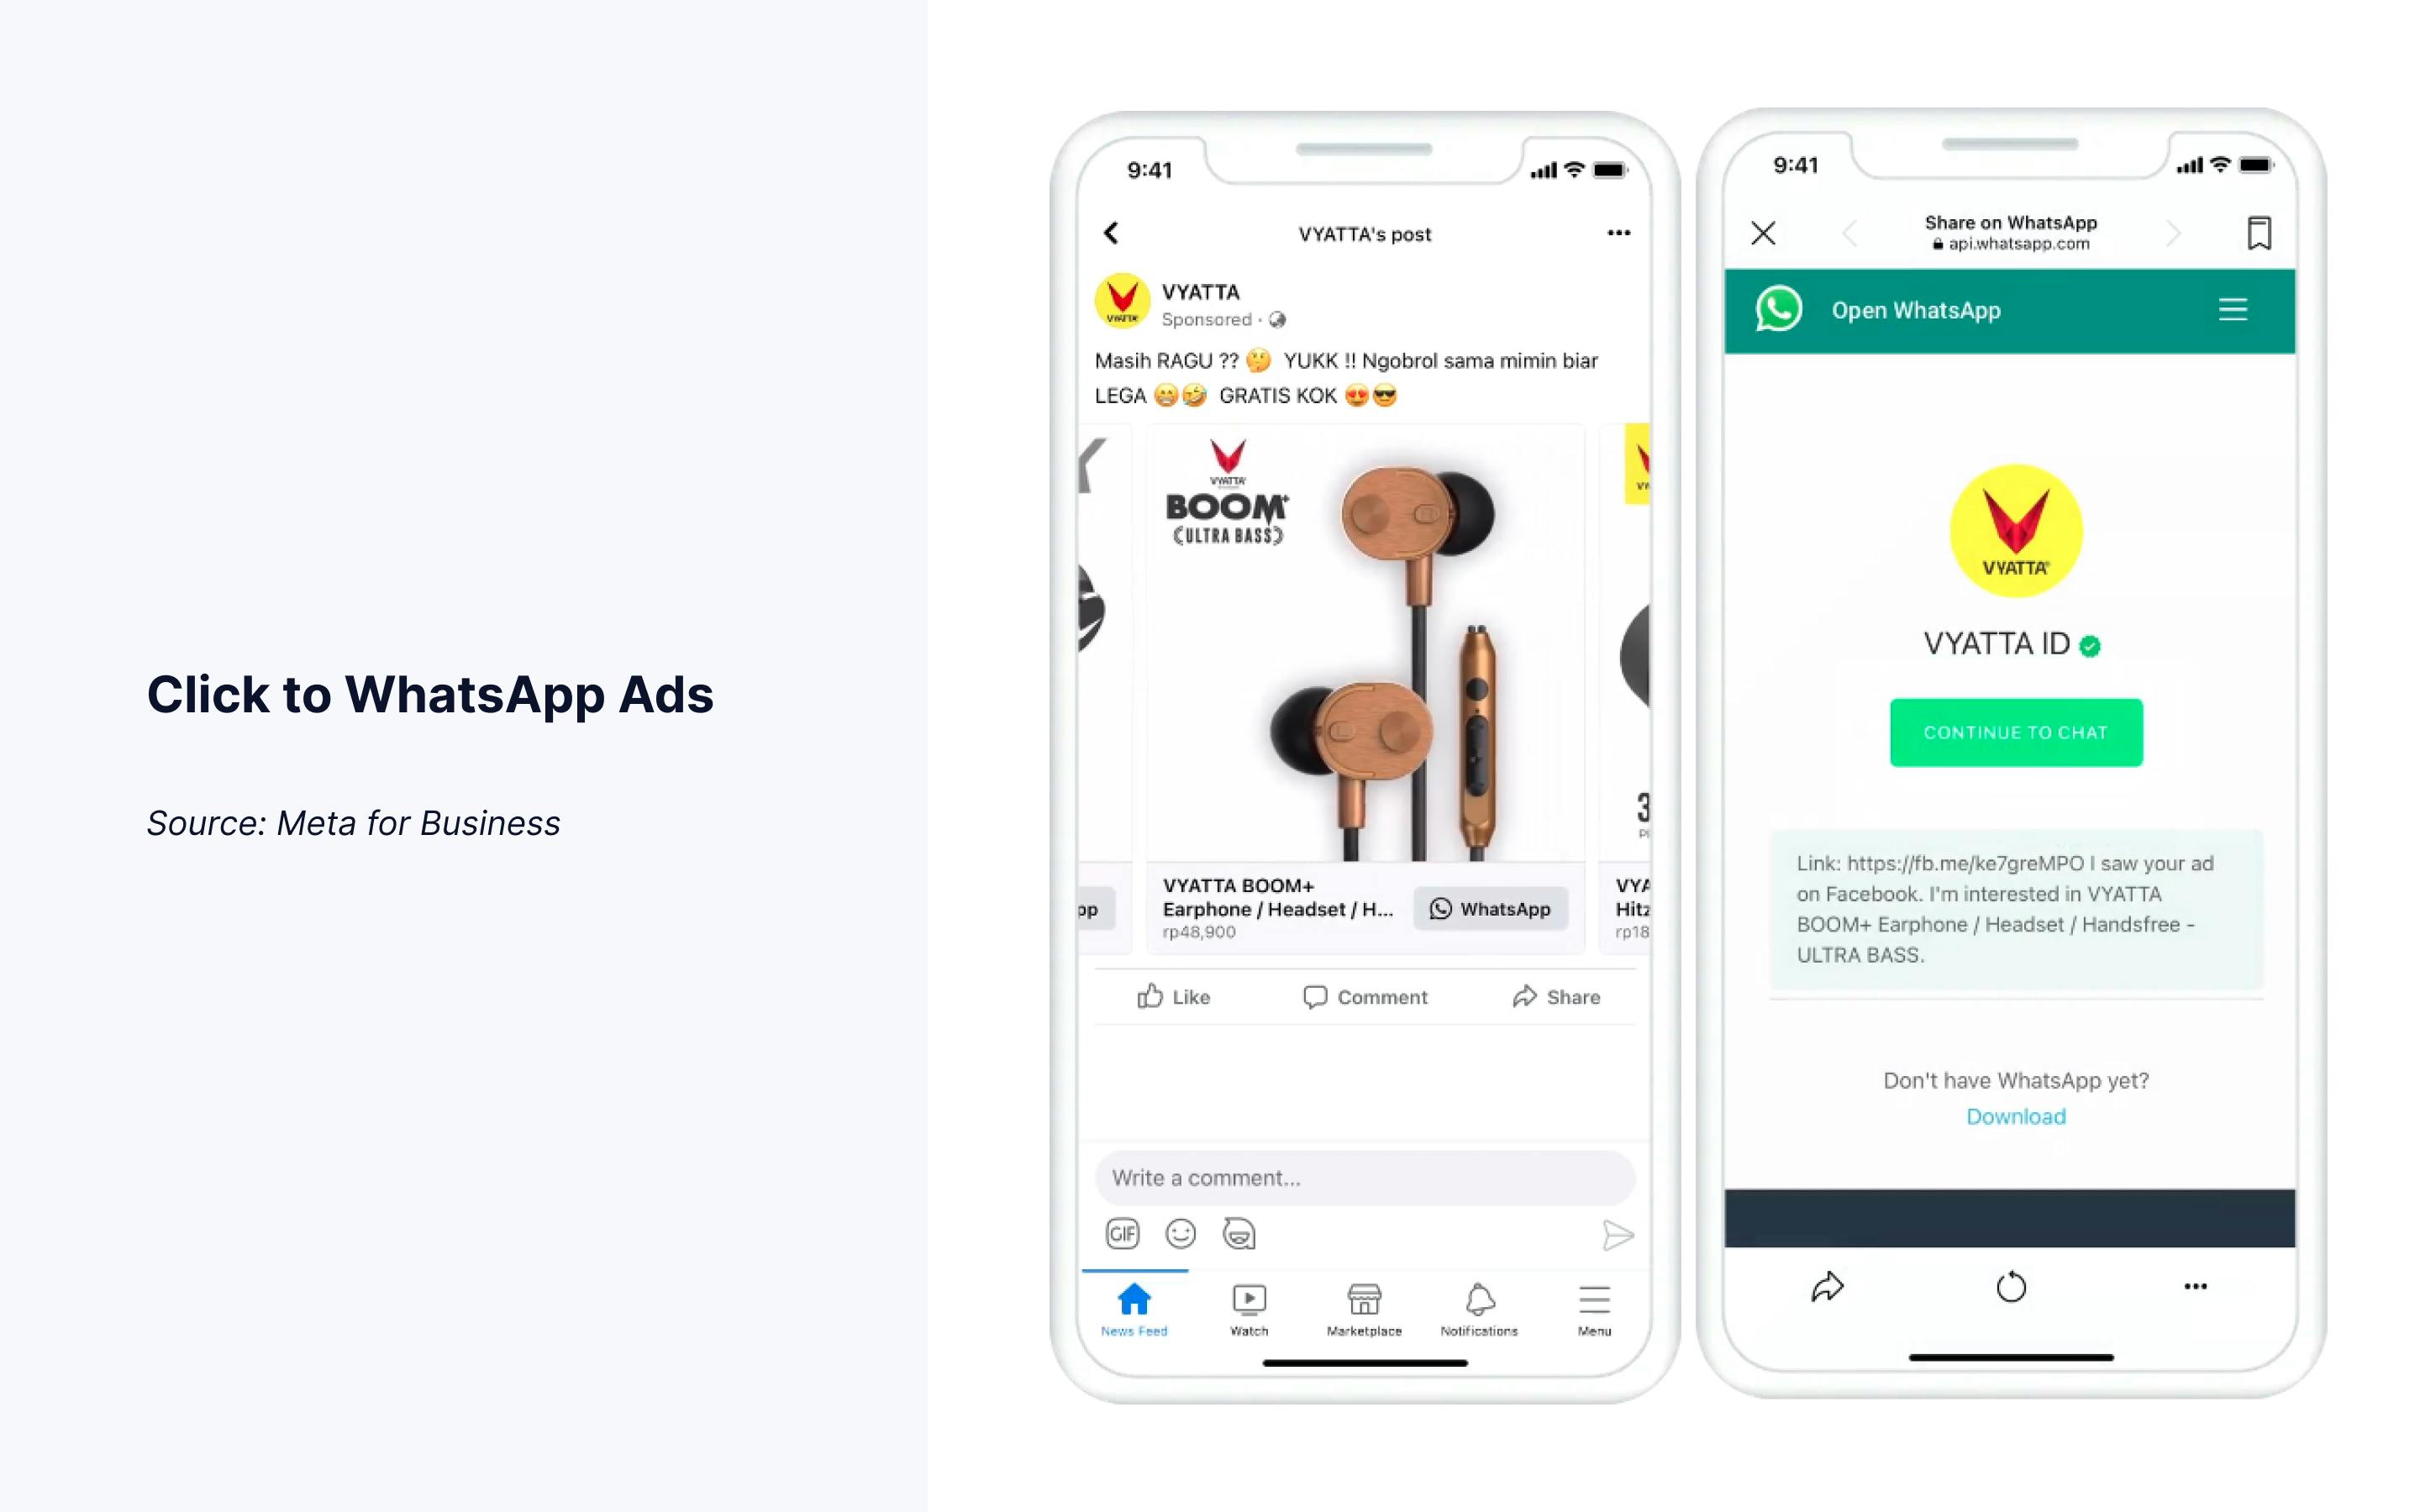 Click to WhatsApp ads for ecommerce